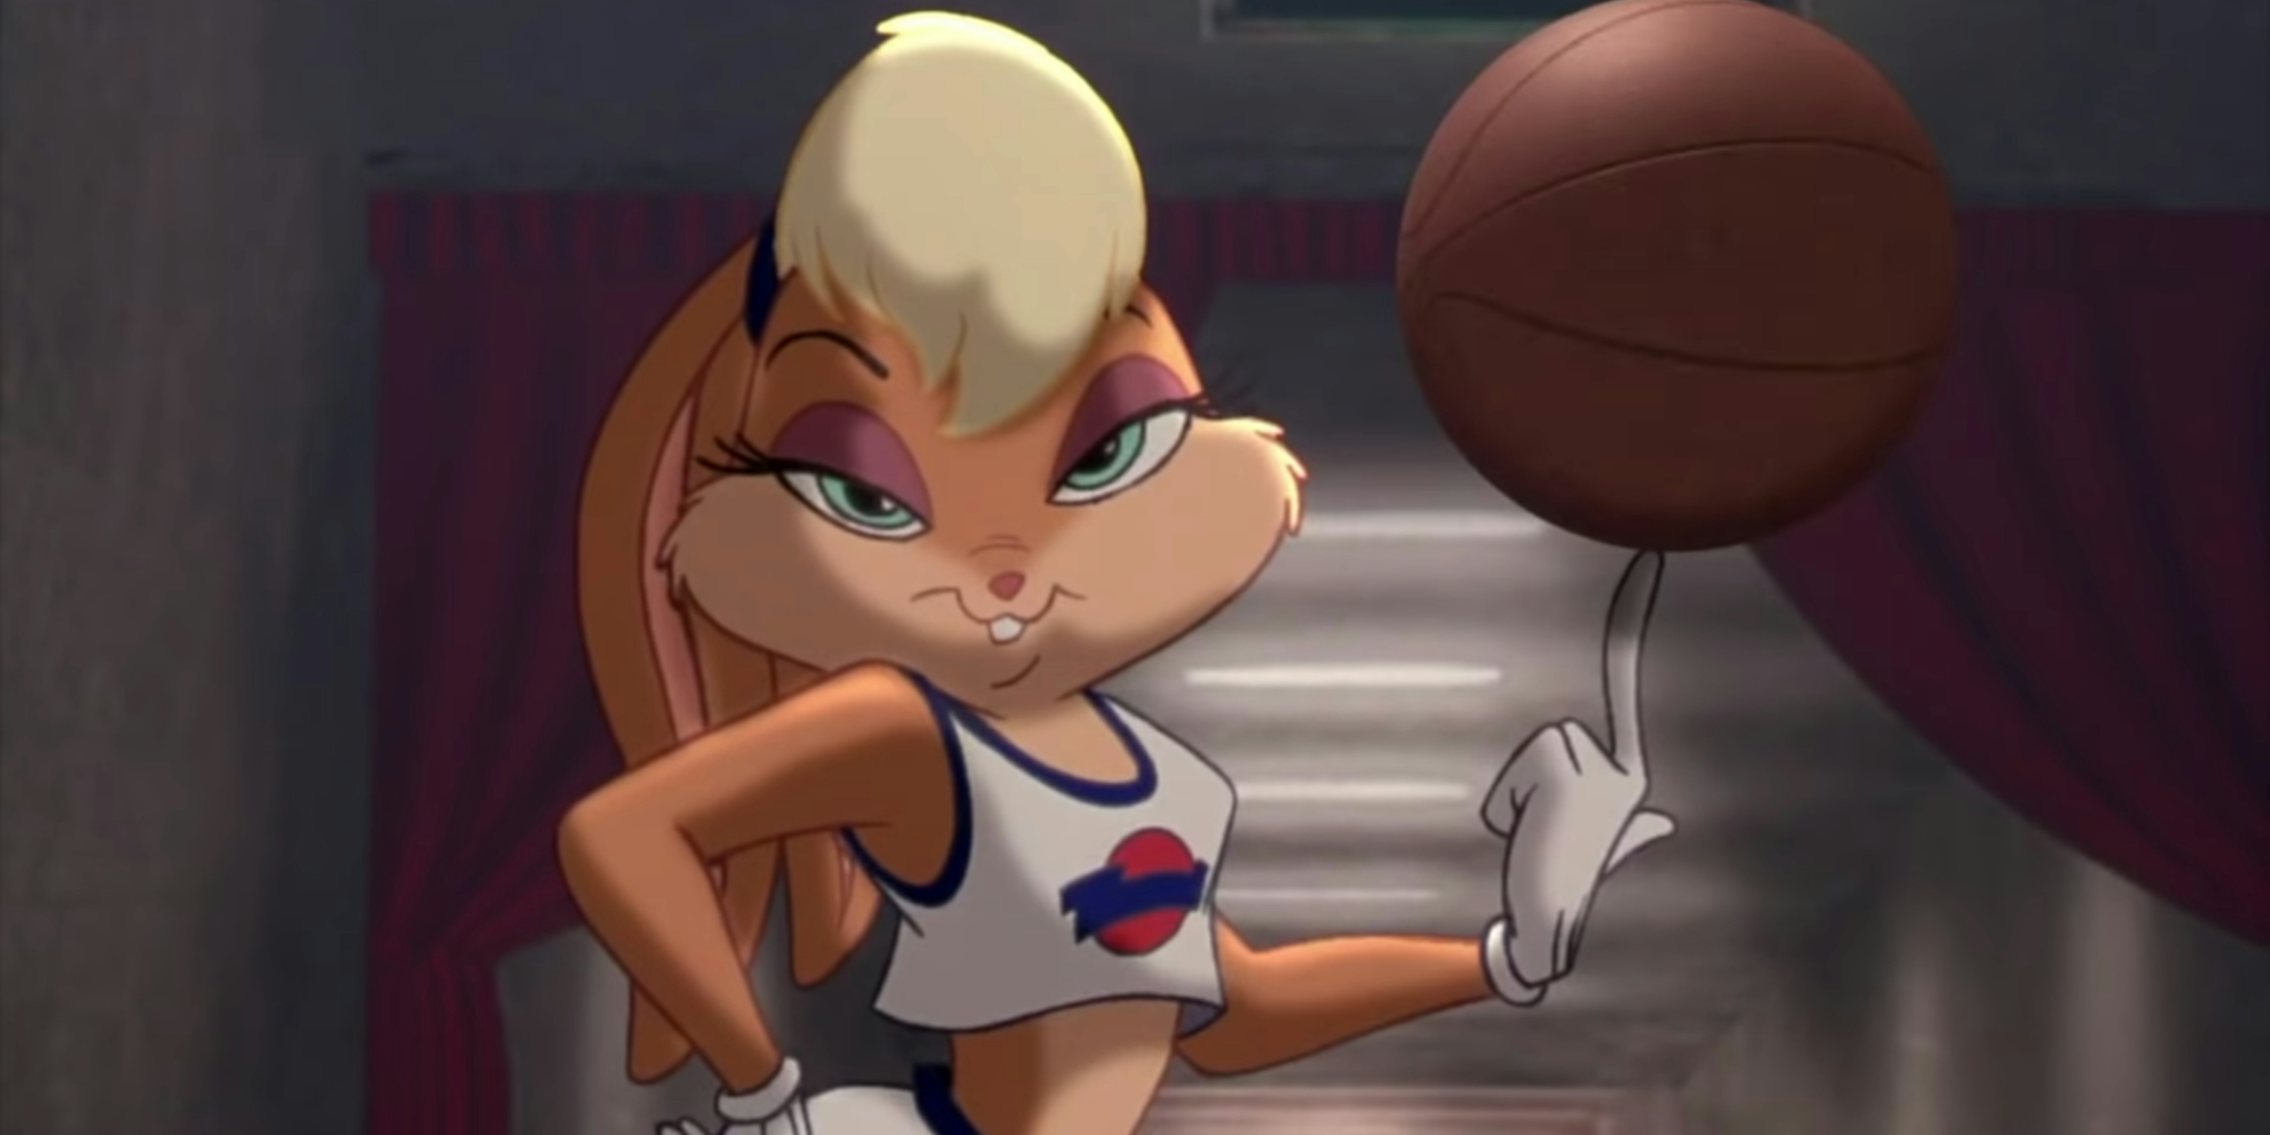 Men Are Throwing Fits Over Lola Bunnys New Less Sexualized Look